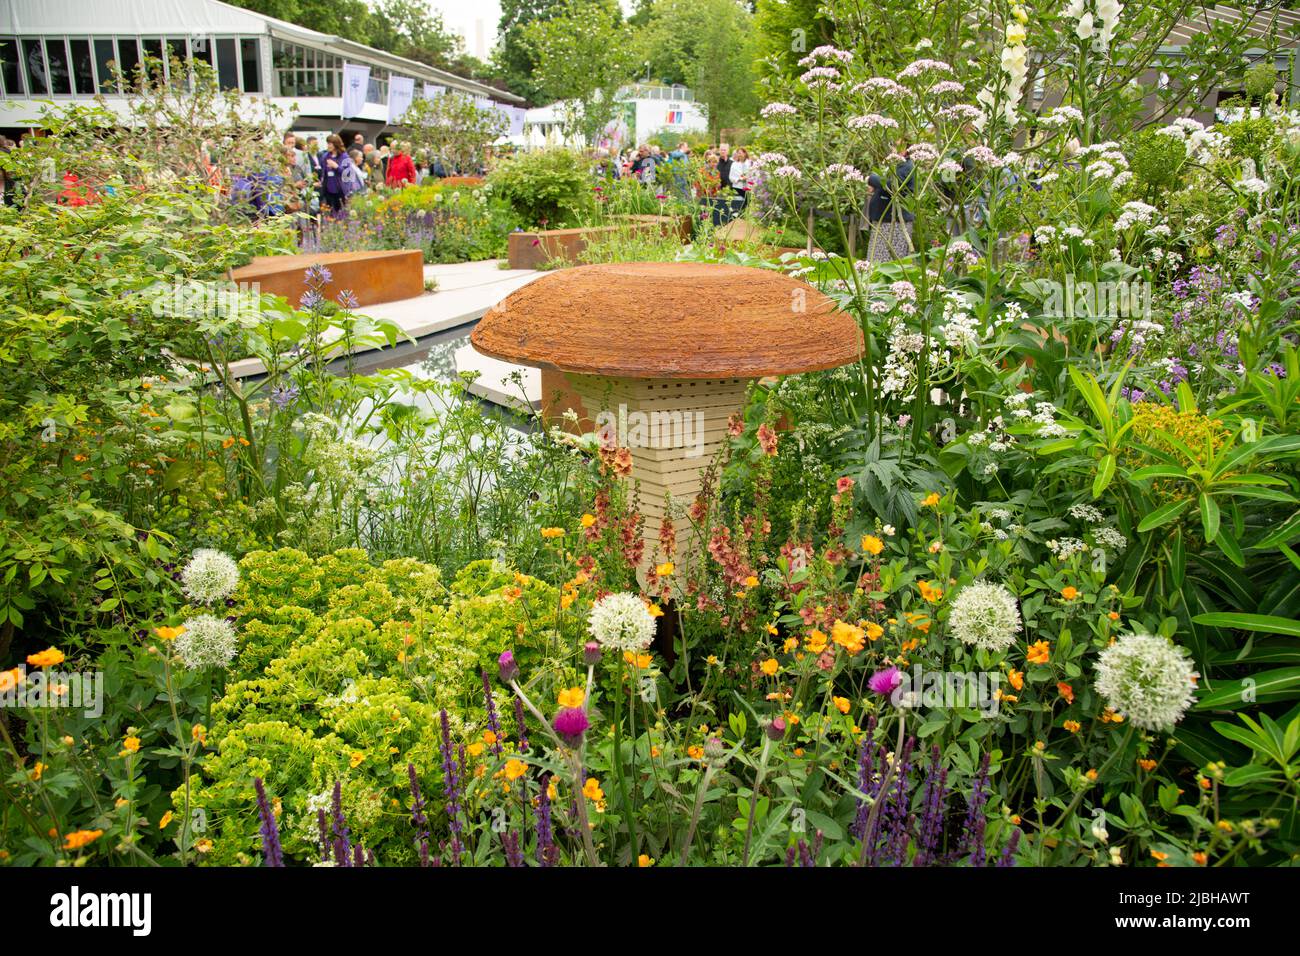 A view of the RHS Garden and visitors in the surrounding grounds of the Chelsea Flower Show. Stock Photo